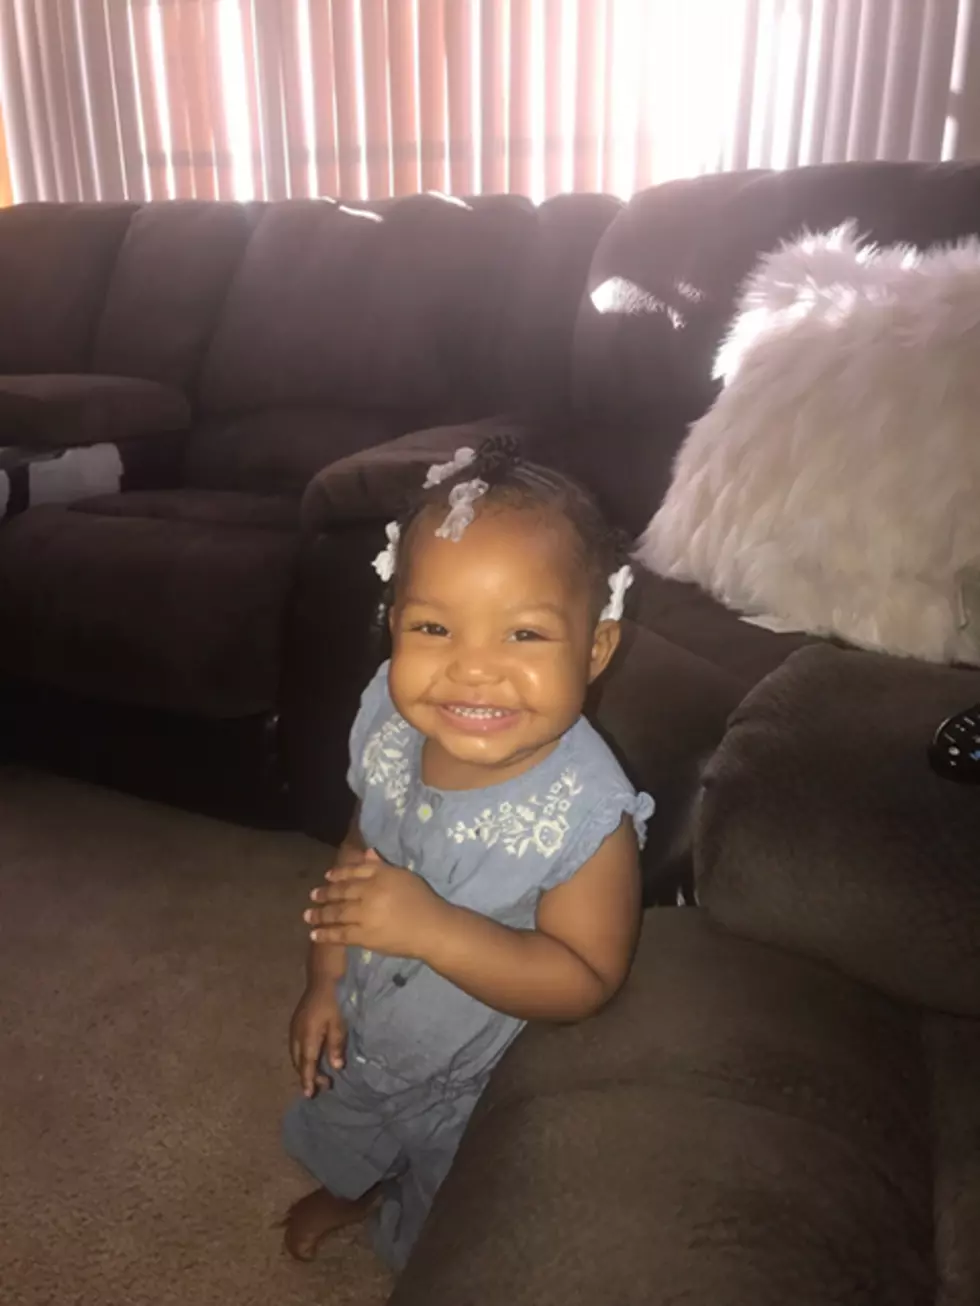 Amber Alert For 7-Month-Old in The Stateline Area